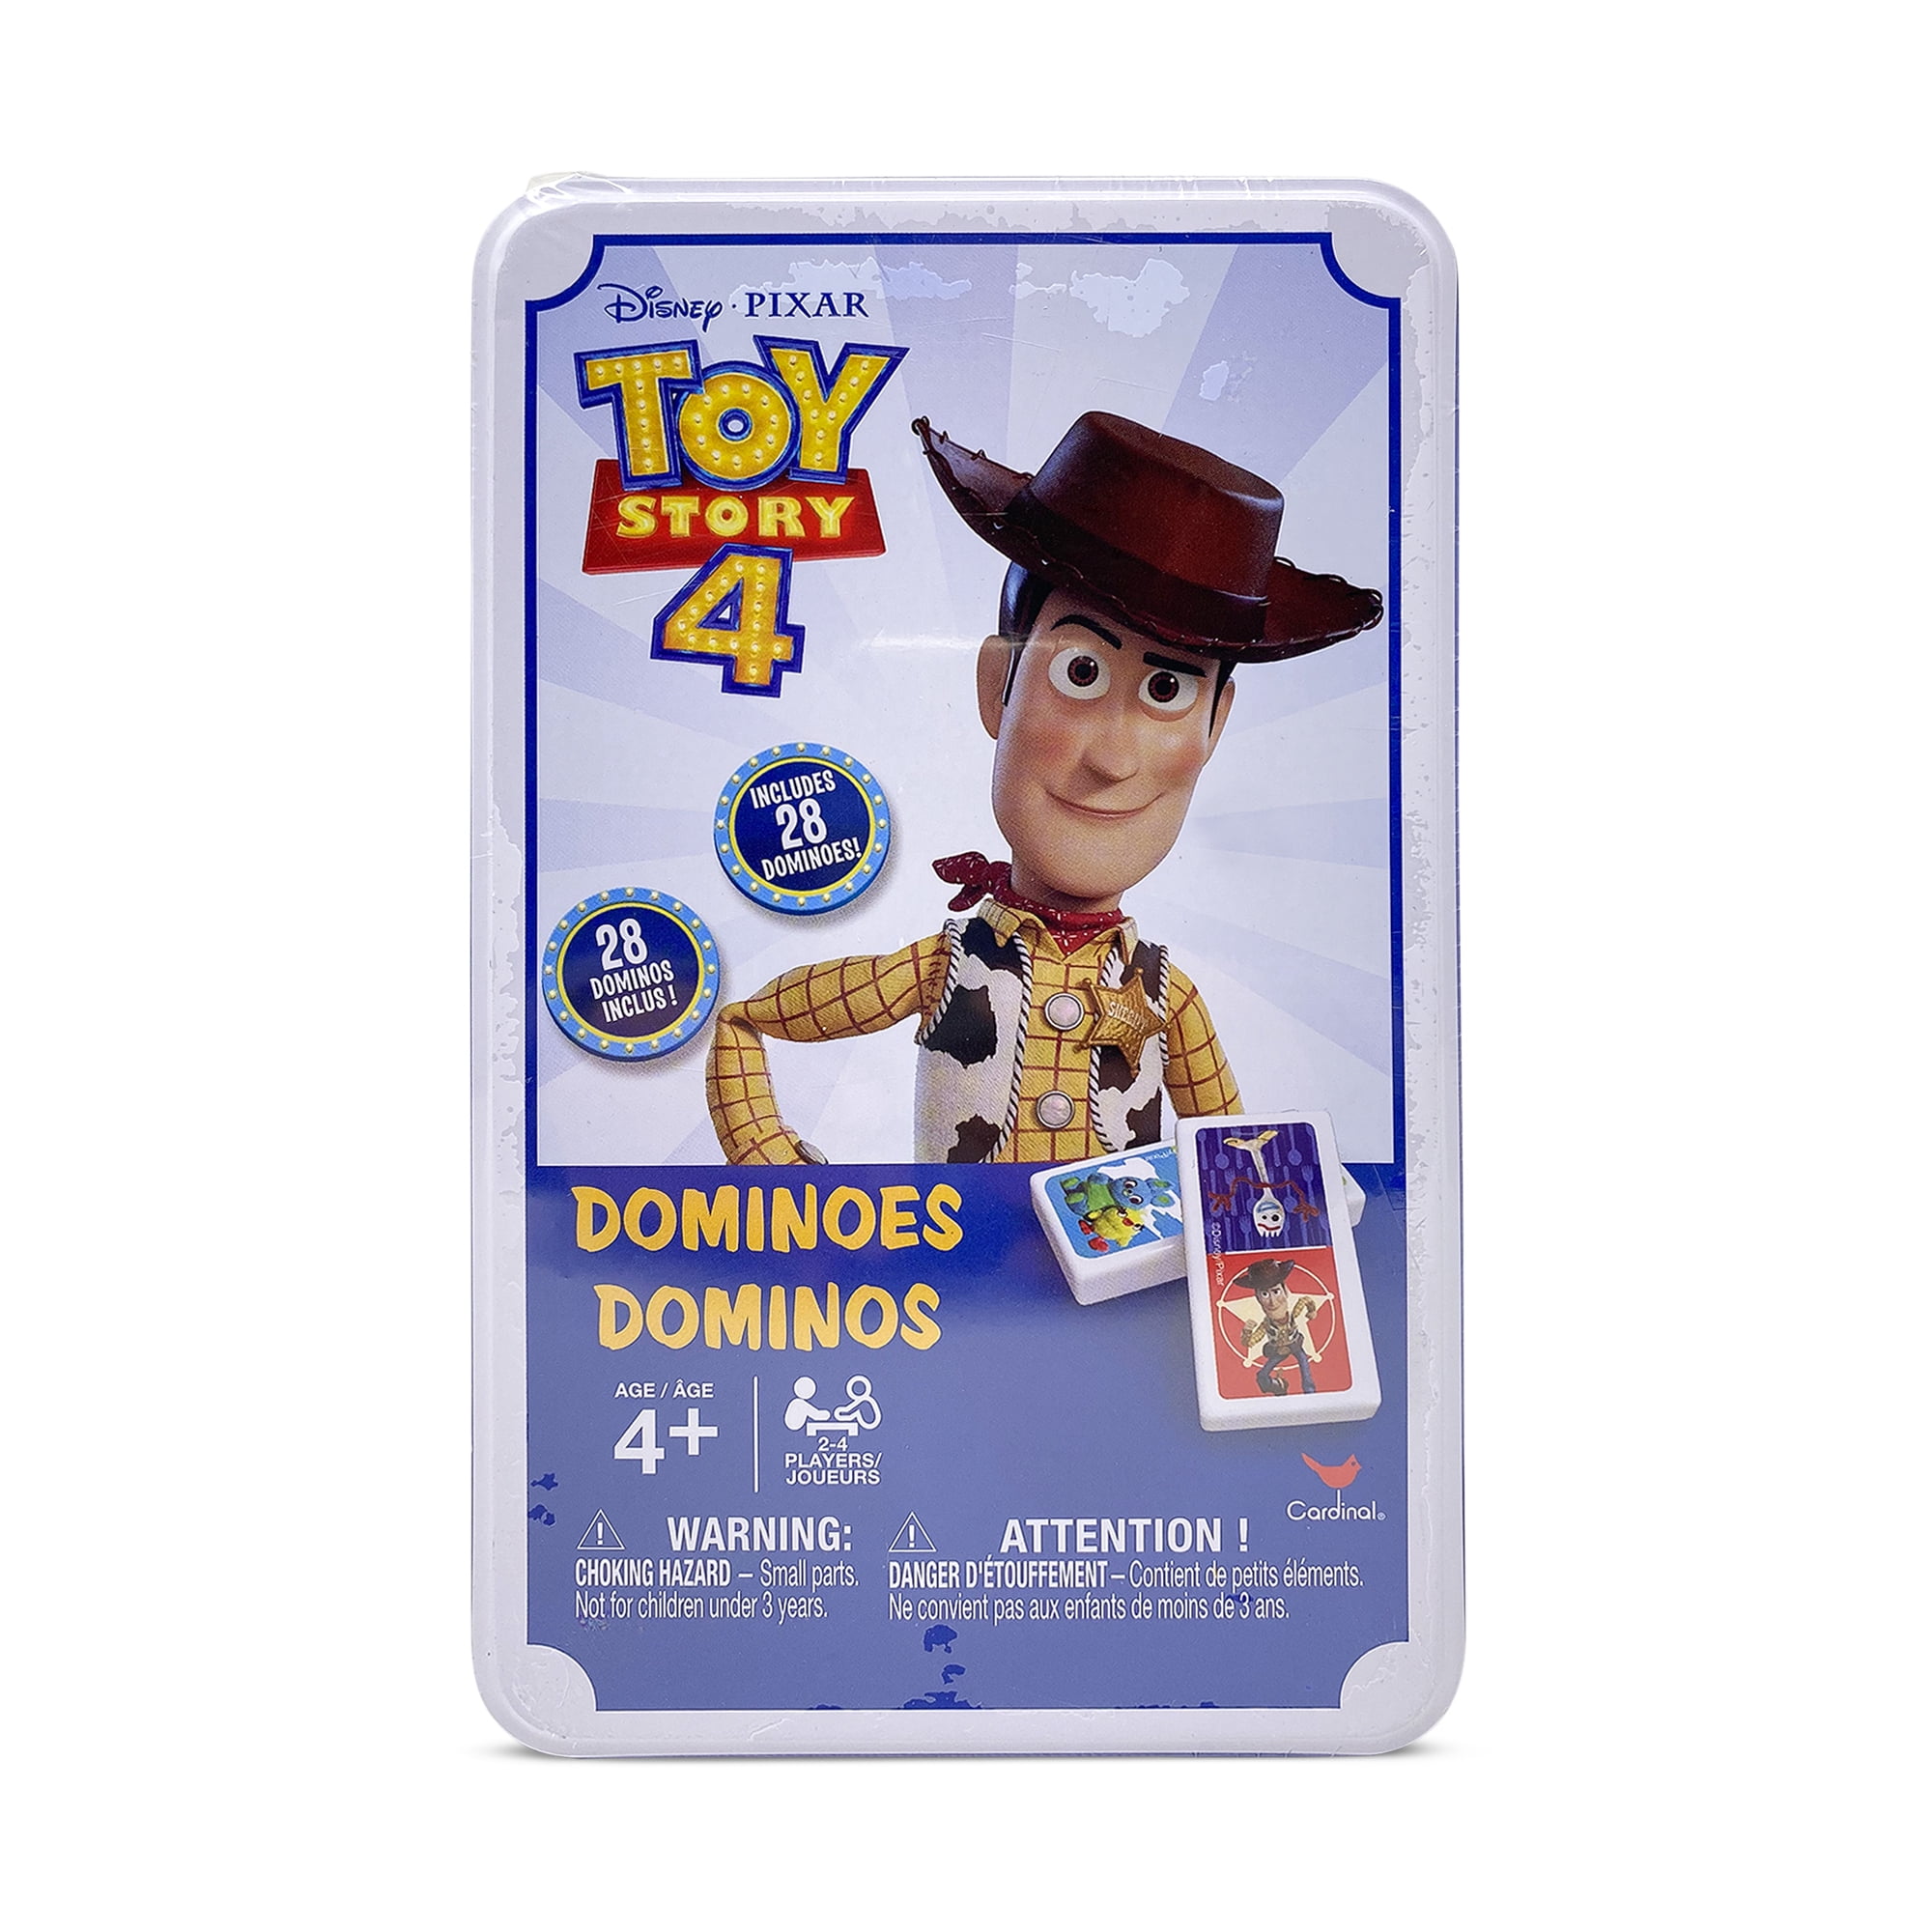 Details about   Disney Pixar Toy Story 4 Dominos in A Tin  NEW 4+ 